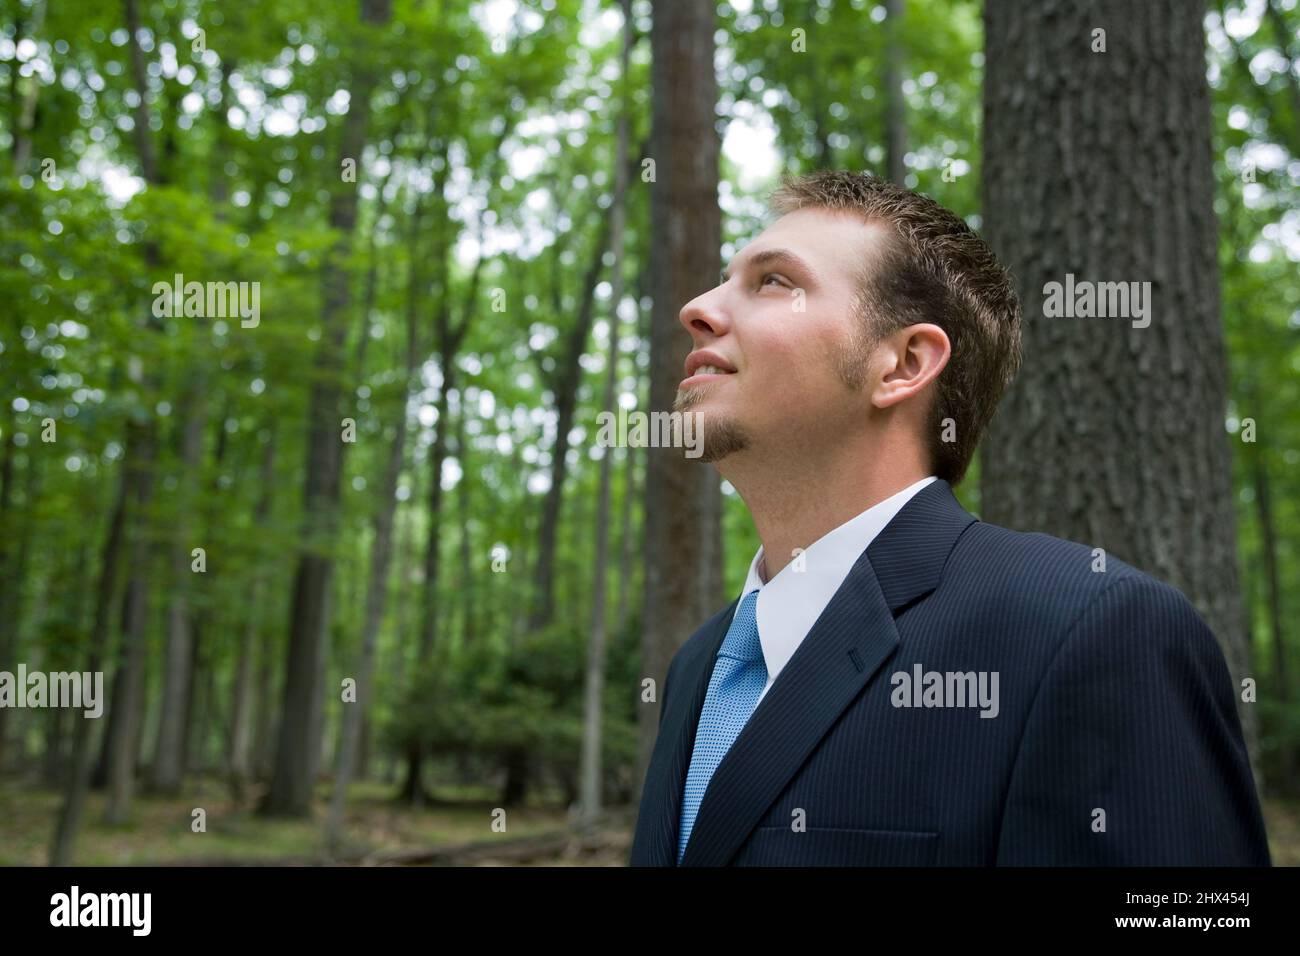 YOUNG BUSINESSMAN STANDING IN TEMPERATE MIXEDNORTHERN FOREST Stock Photo